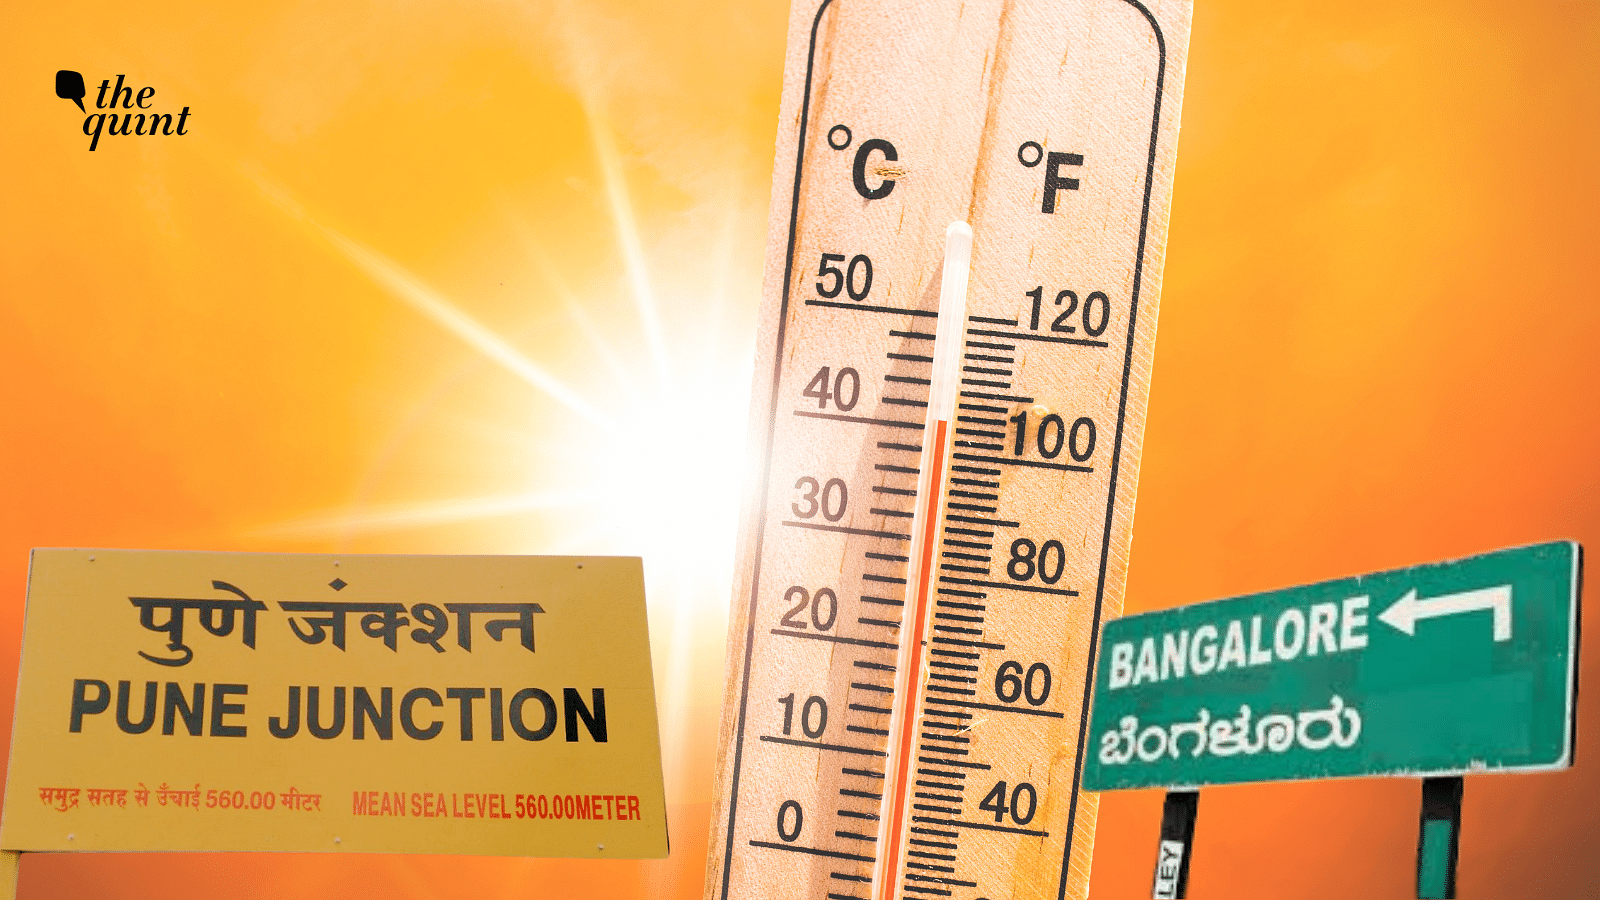 <div class="paragraphs"><p>Bengaluru had its second hottest day in 50 years in April. Pune will see 40-42 degrees Celsius in the next few days.</p></div>